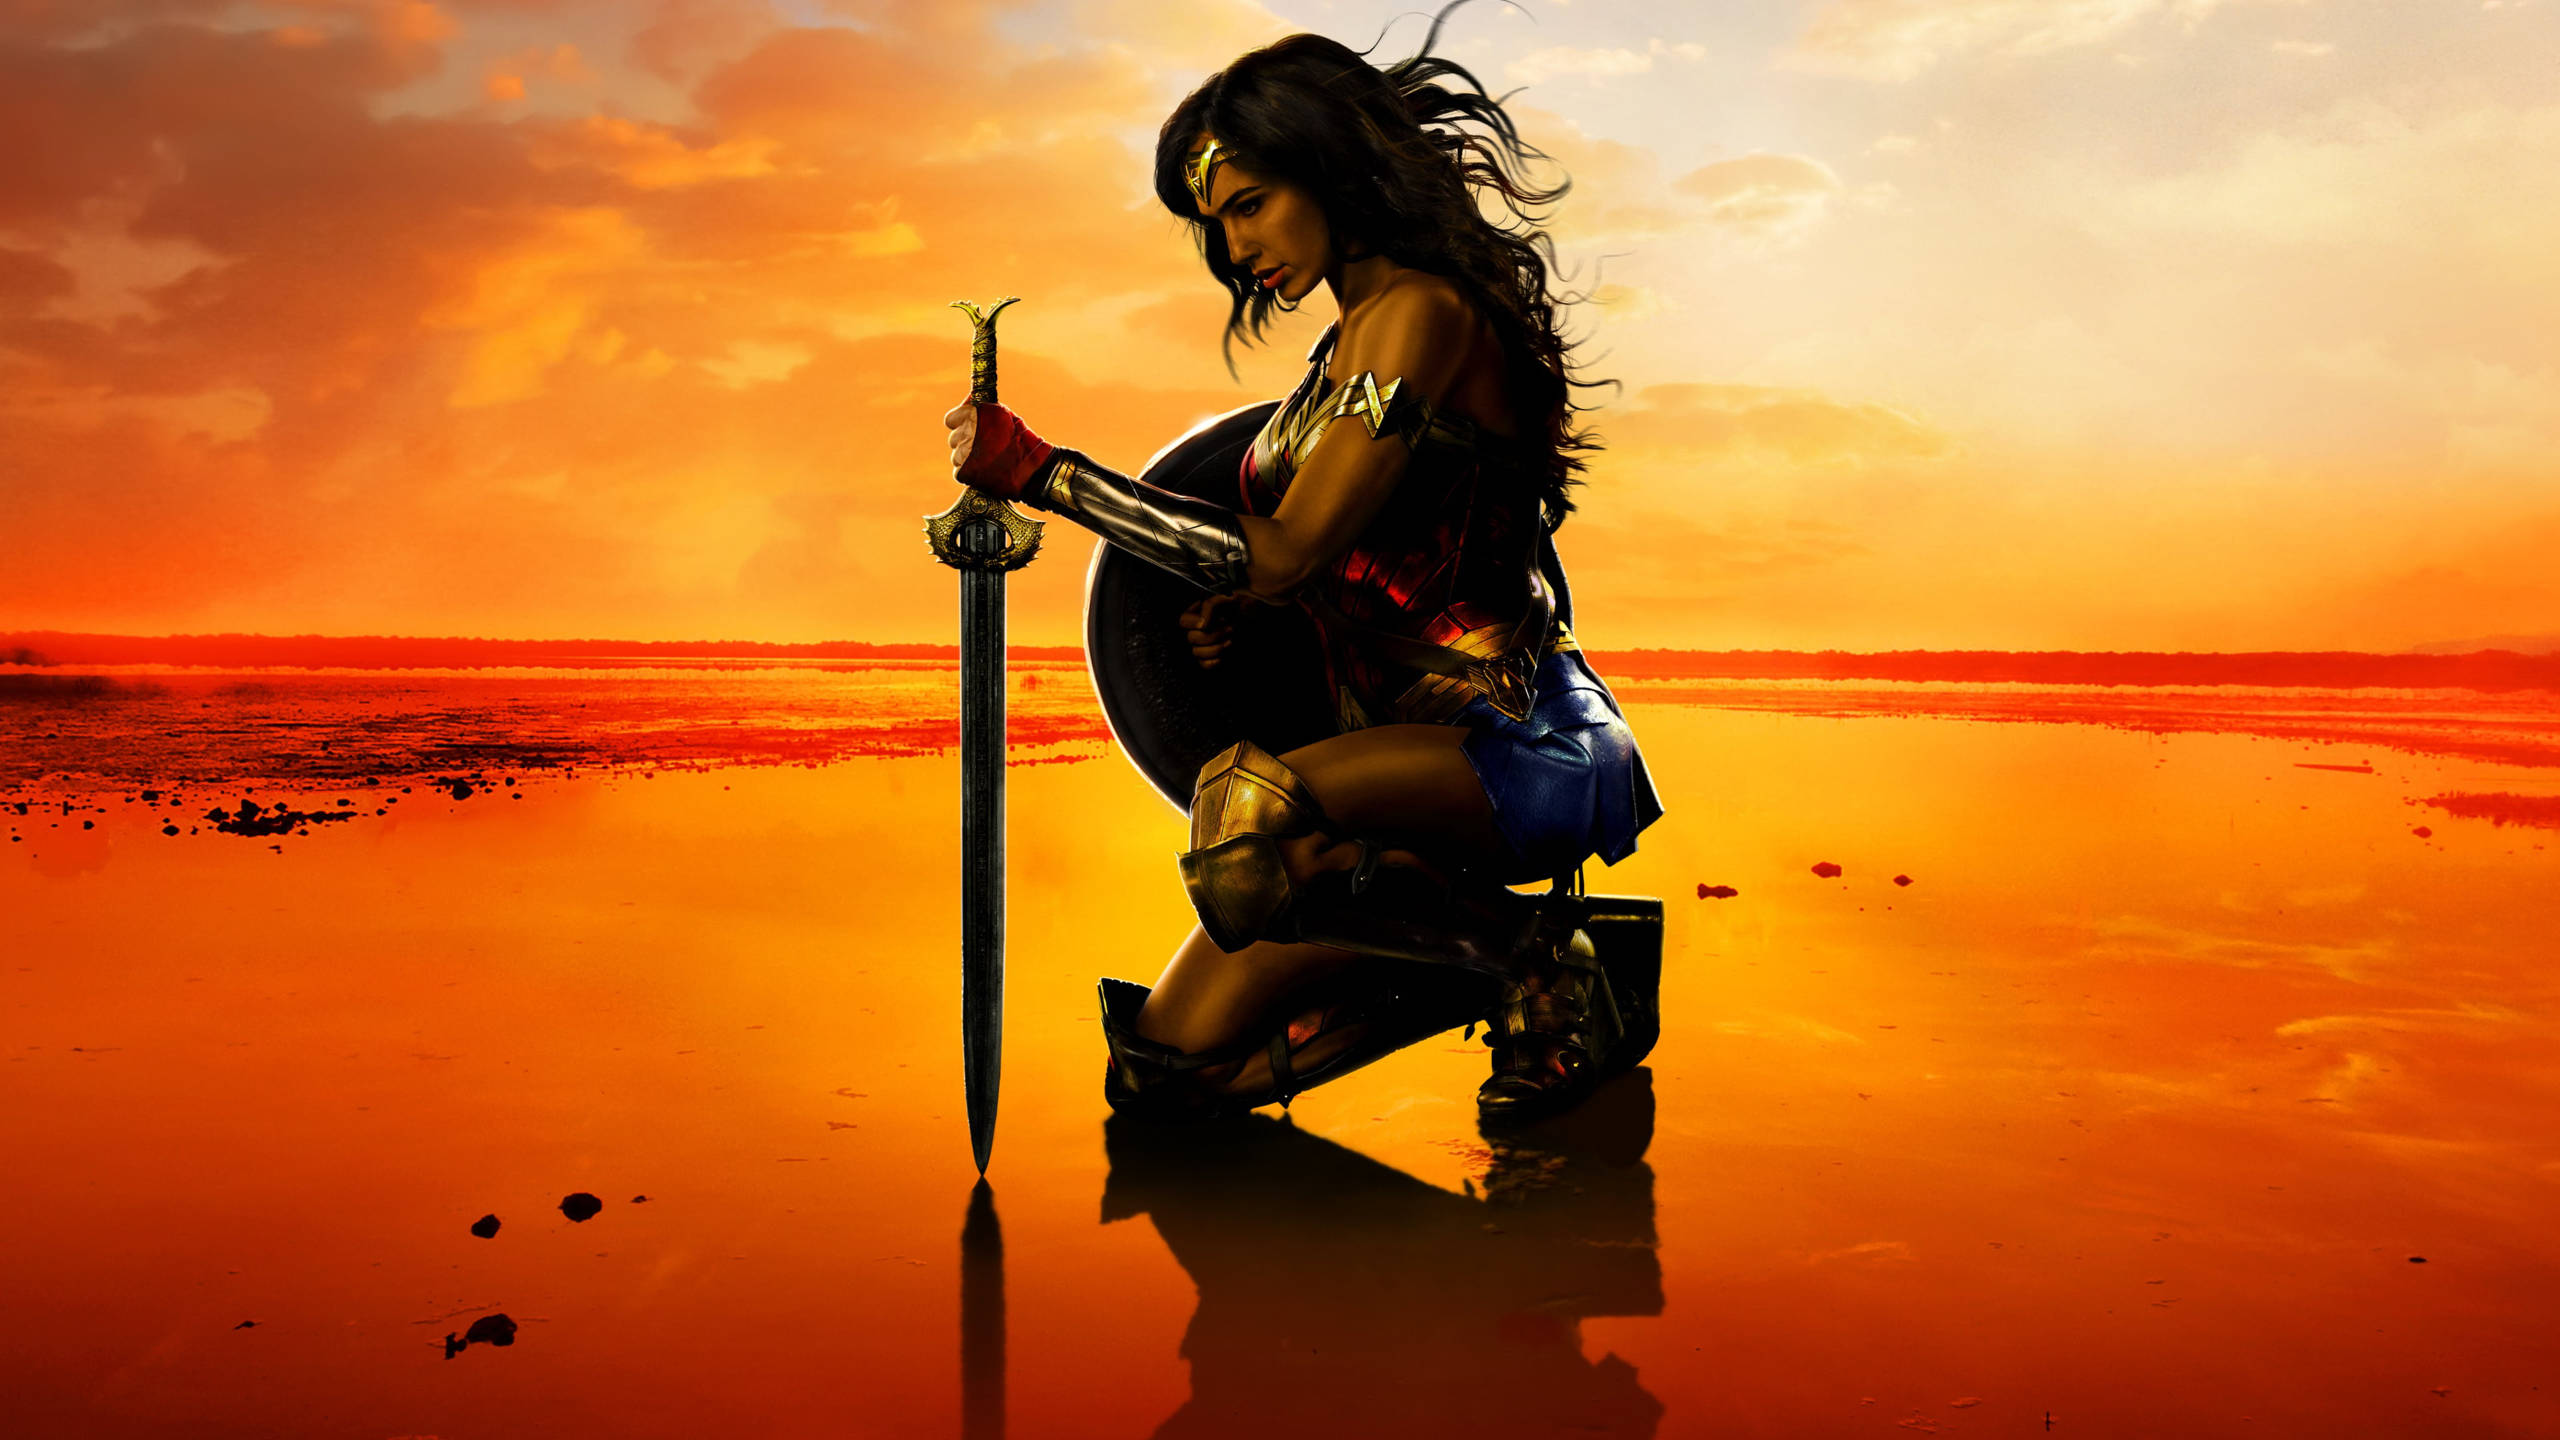 Wonder Woman Movie Cover Background